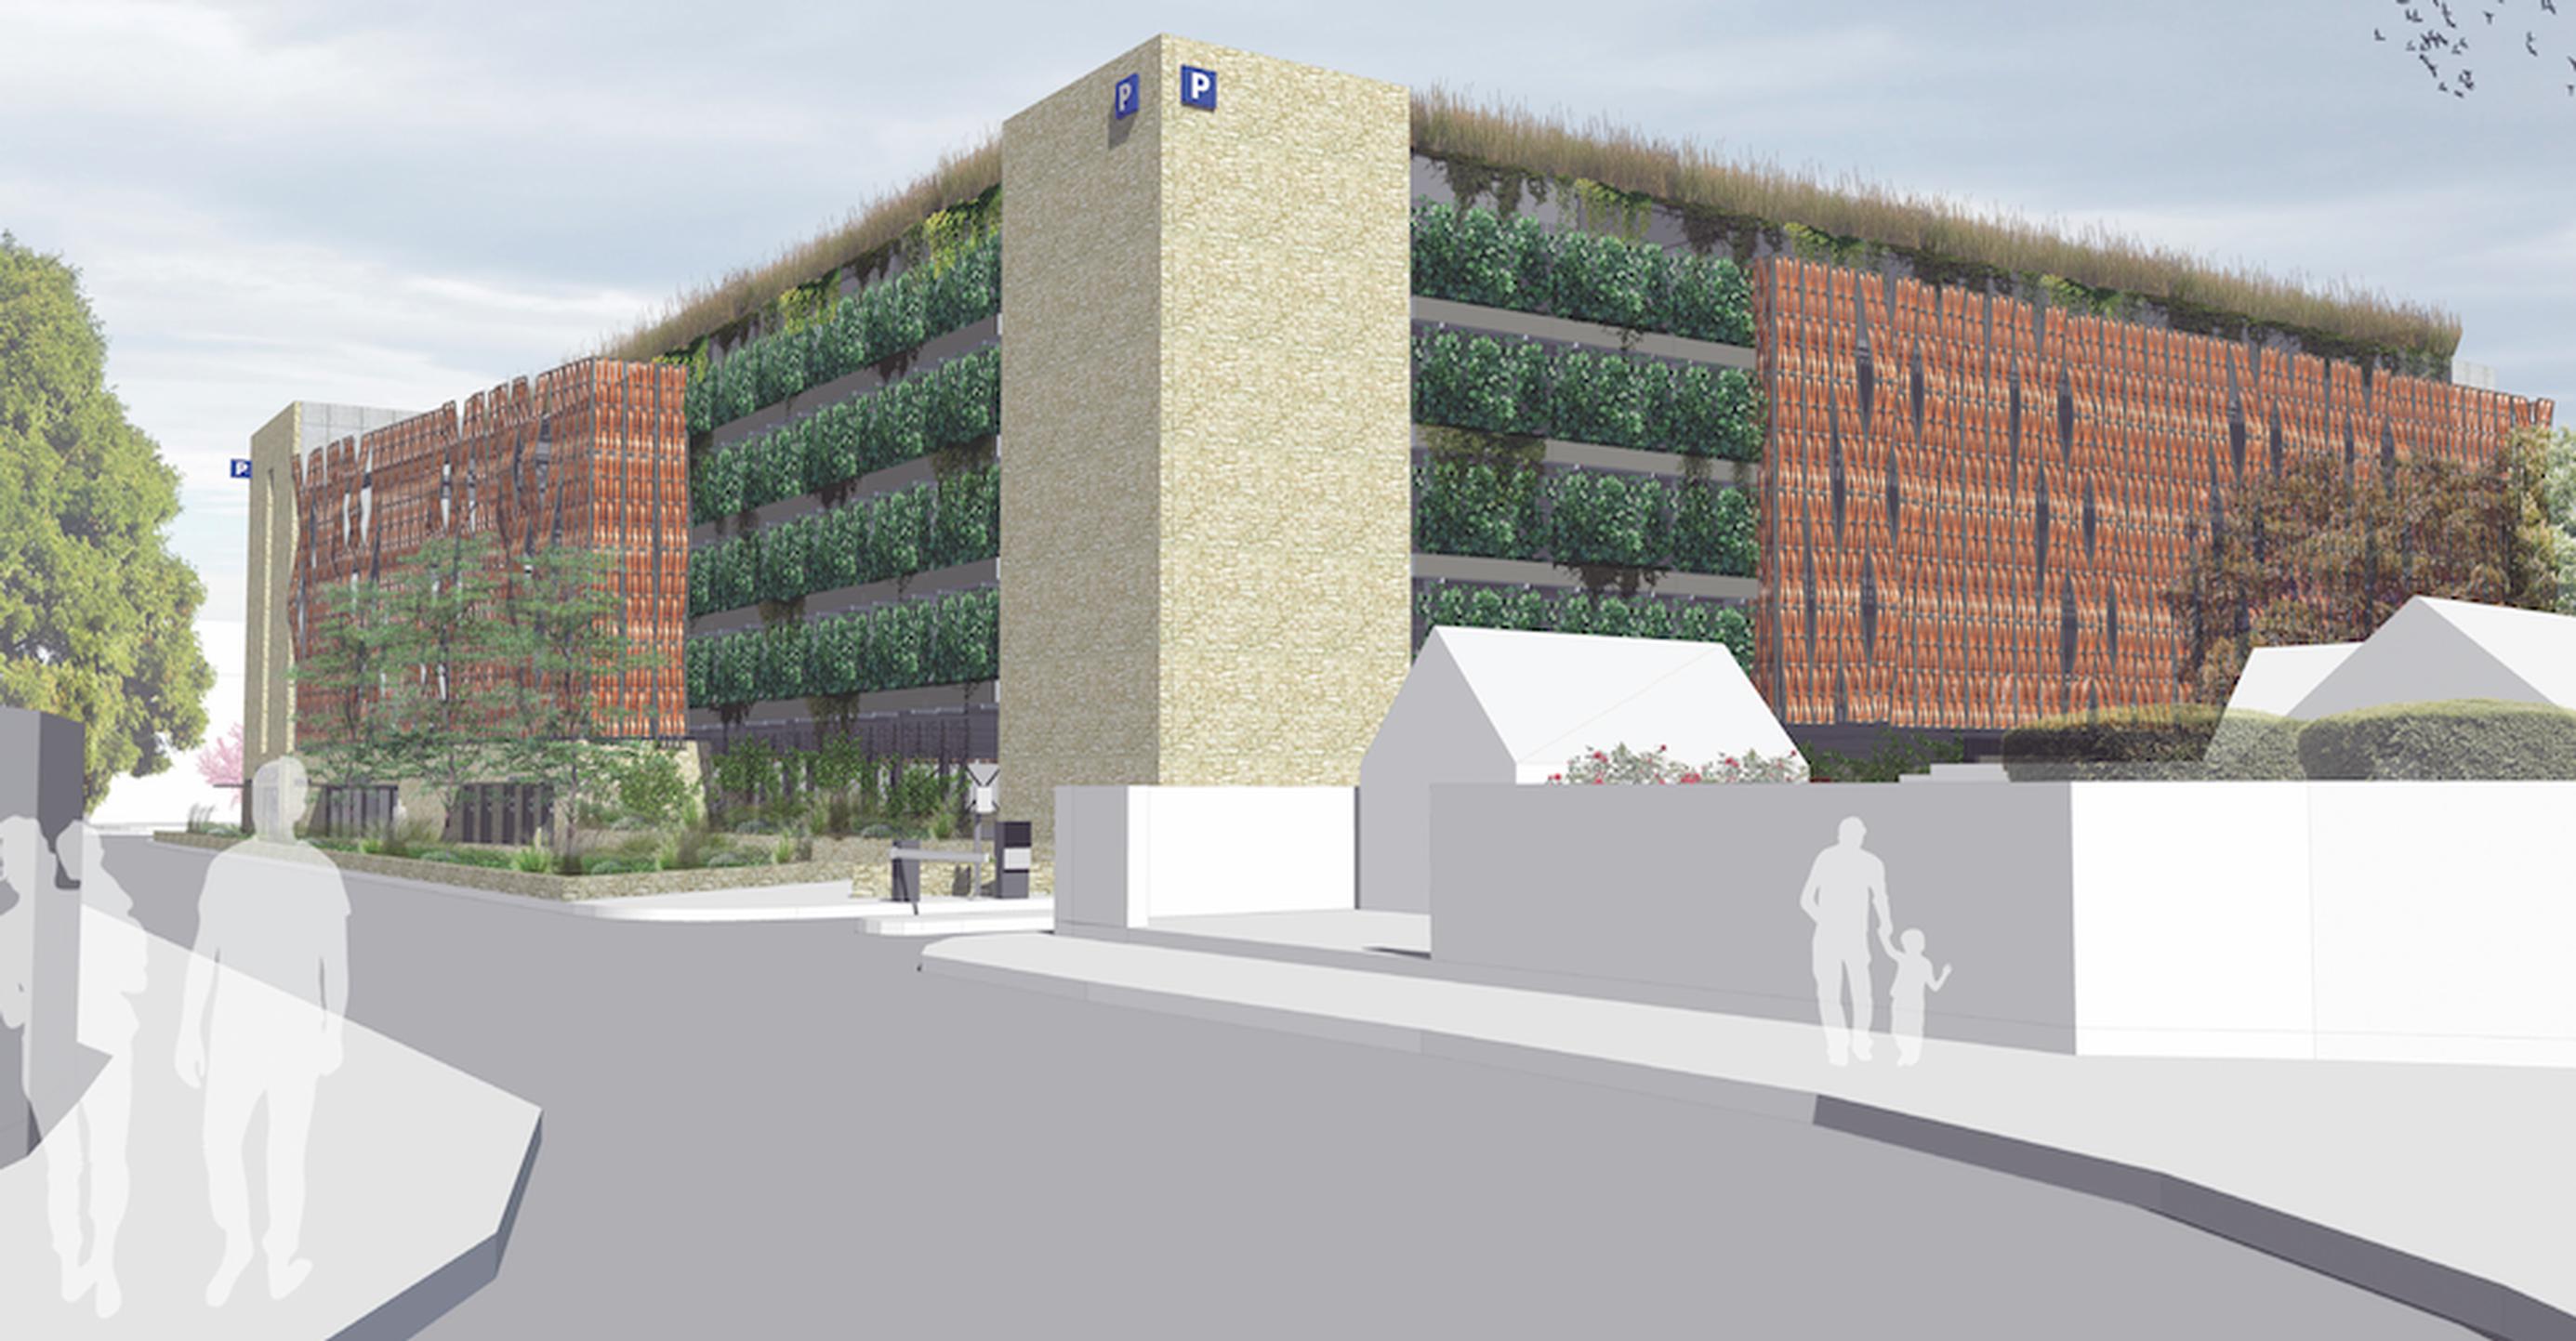 The proposed façade of the planned Waterloo car park